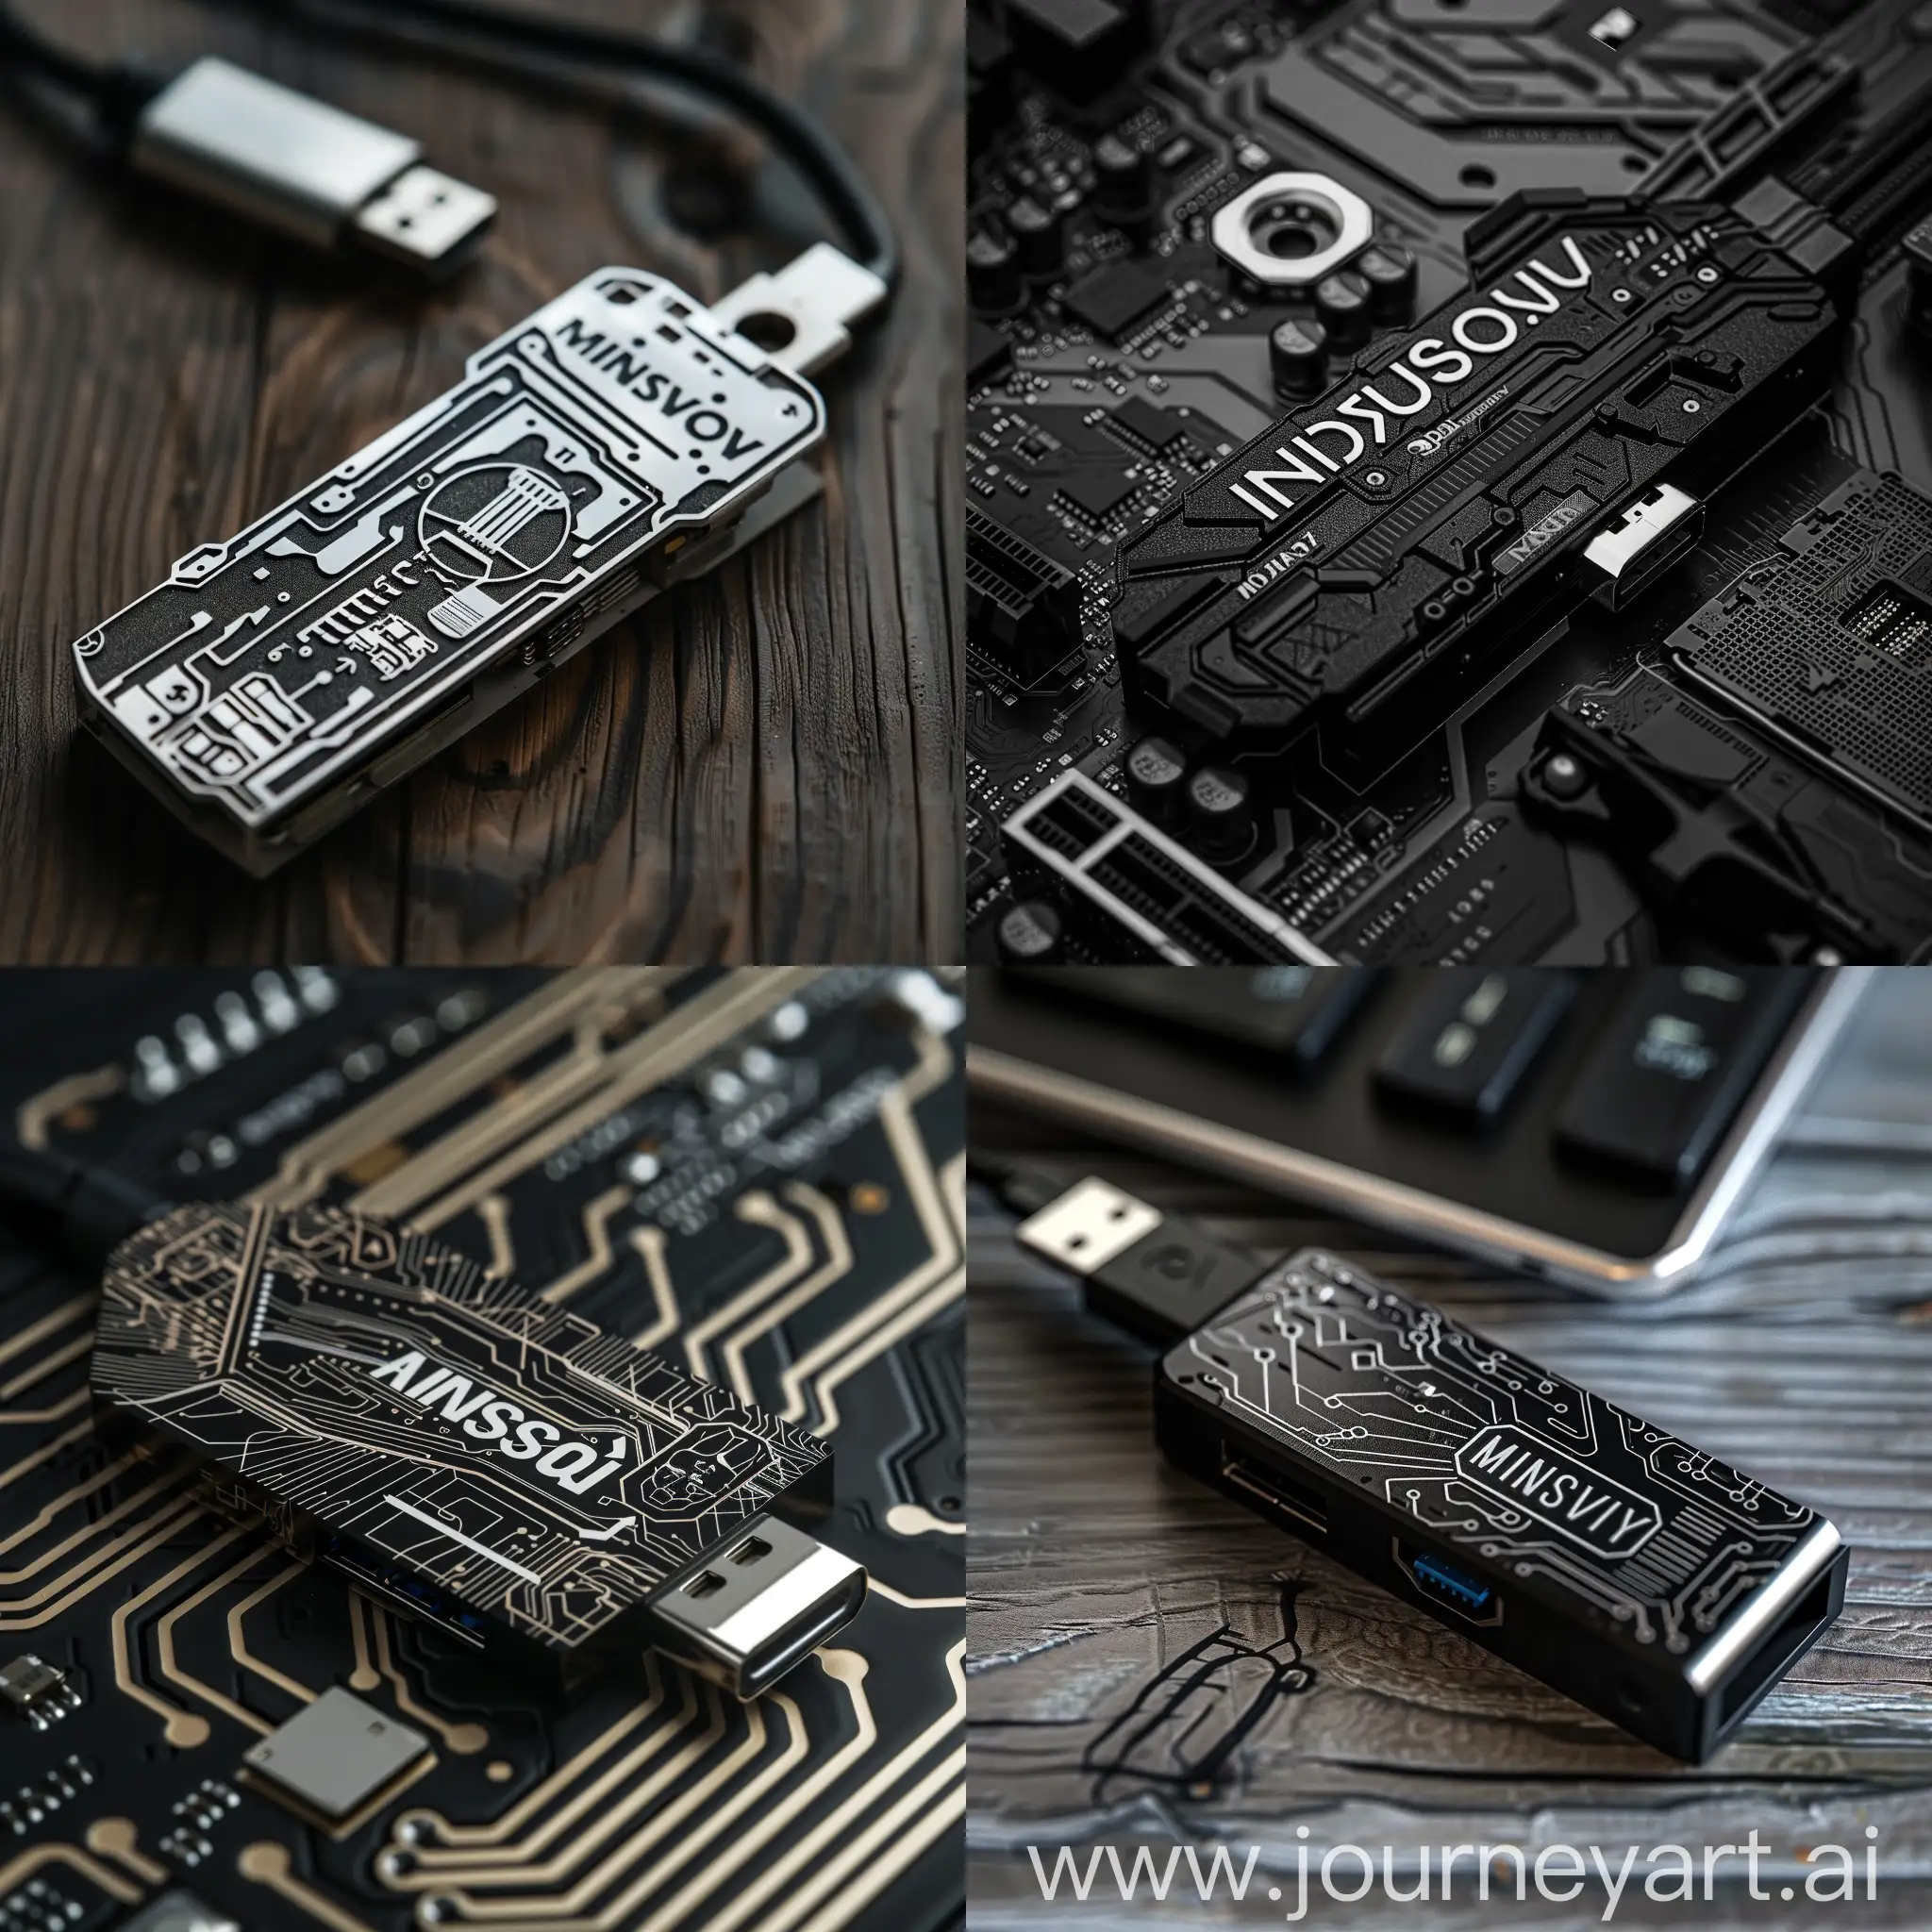 Black-and-White-Cyberpunk-Style-USB-Drive-with-MINUSOVOY-Inscription